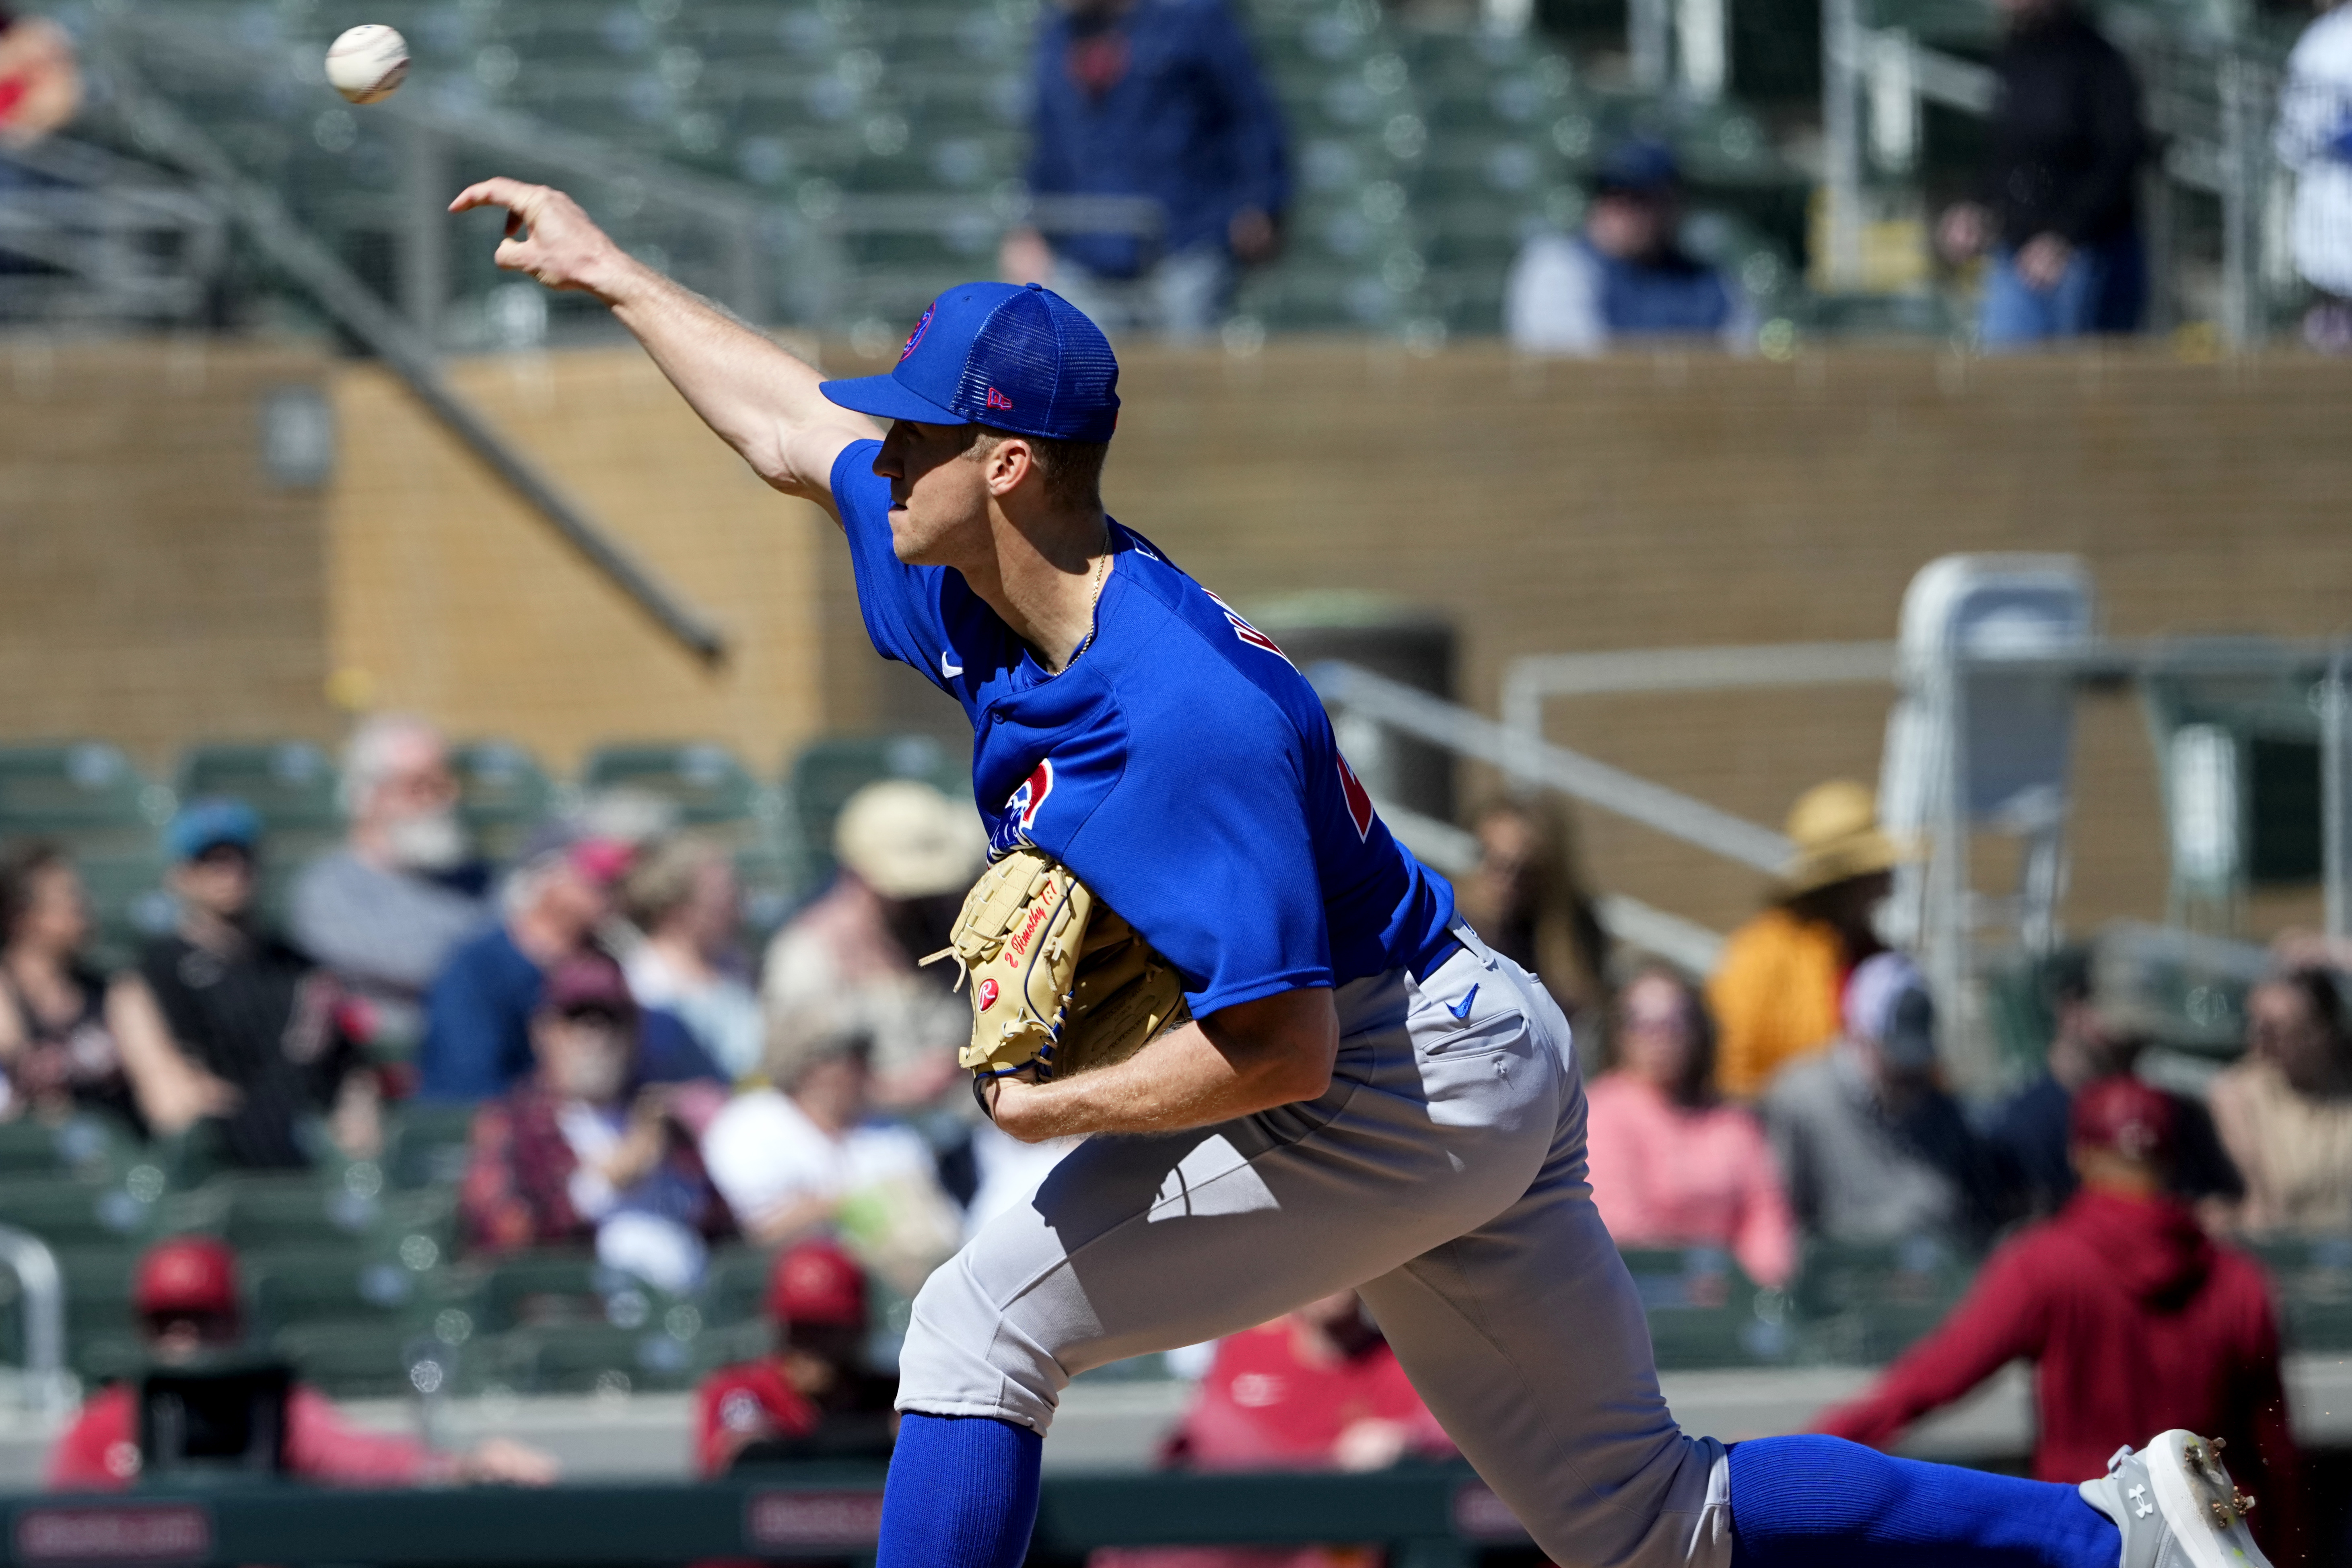 Recalled to the Major Leagues, Can Chicago Cubs' David Bote Return